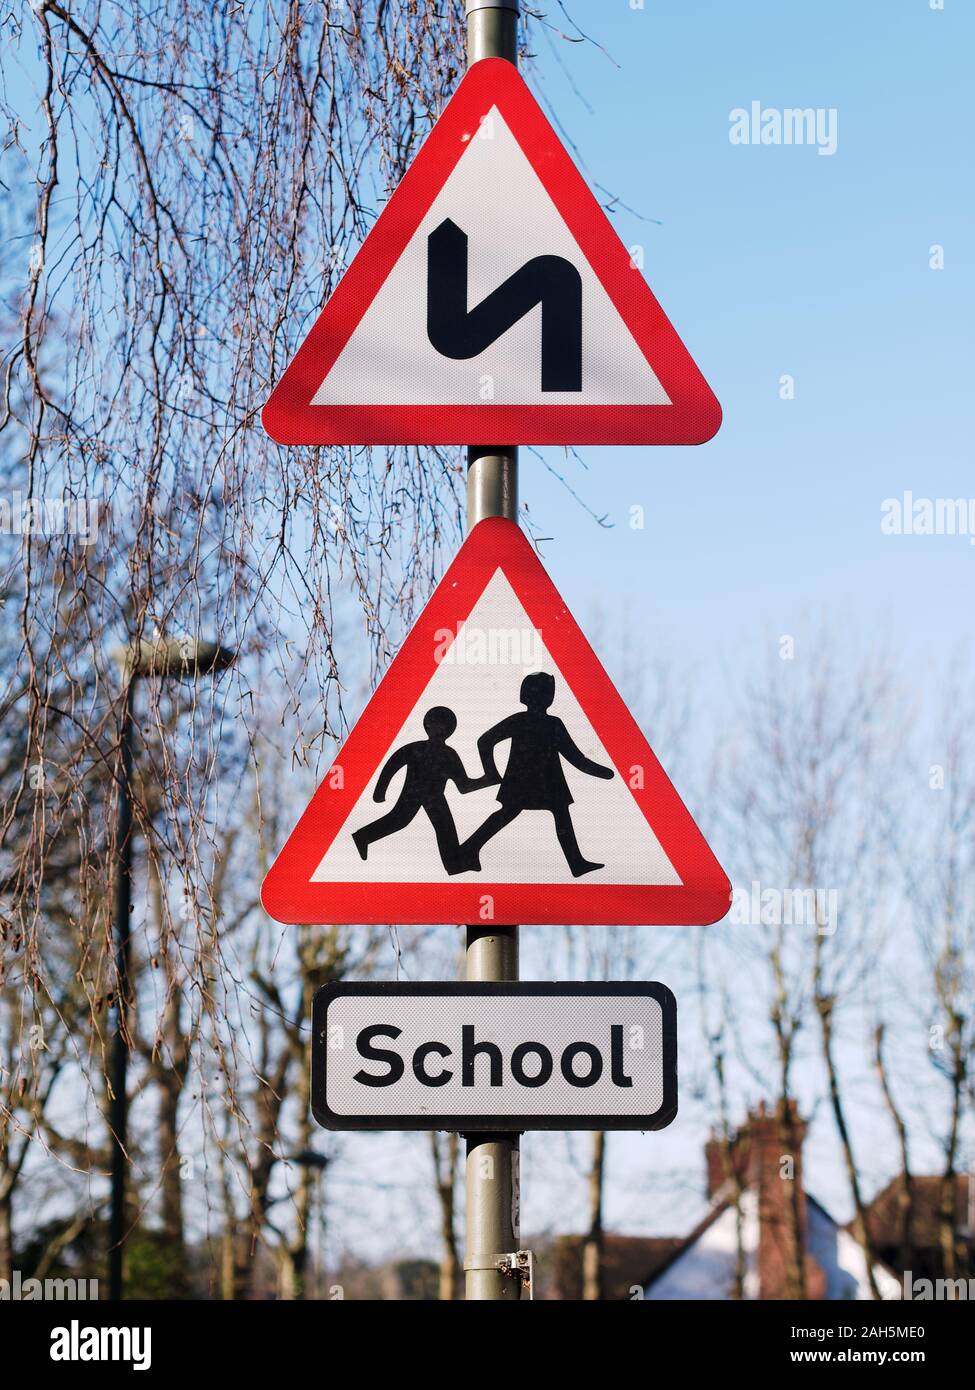 Double bend first to left sign and school children crossing sign. UK road traffic triangular warning signs Stock Photo